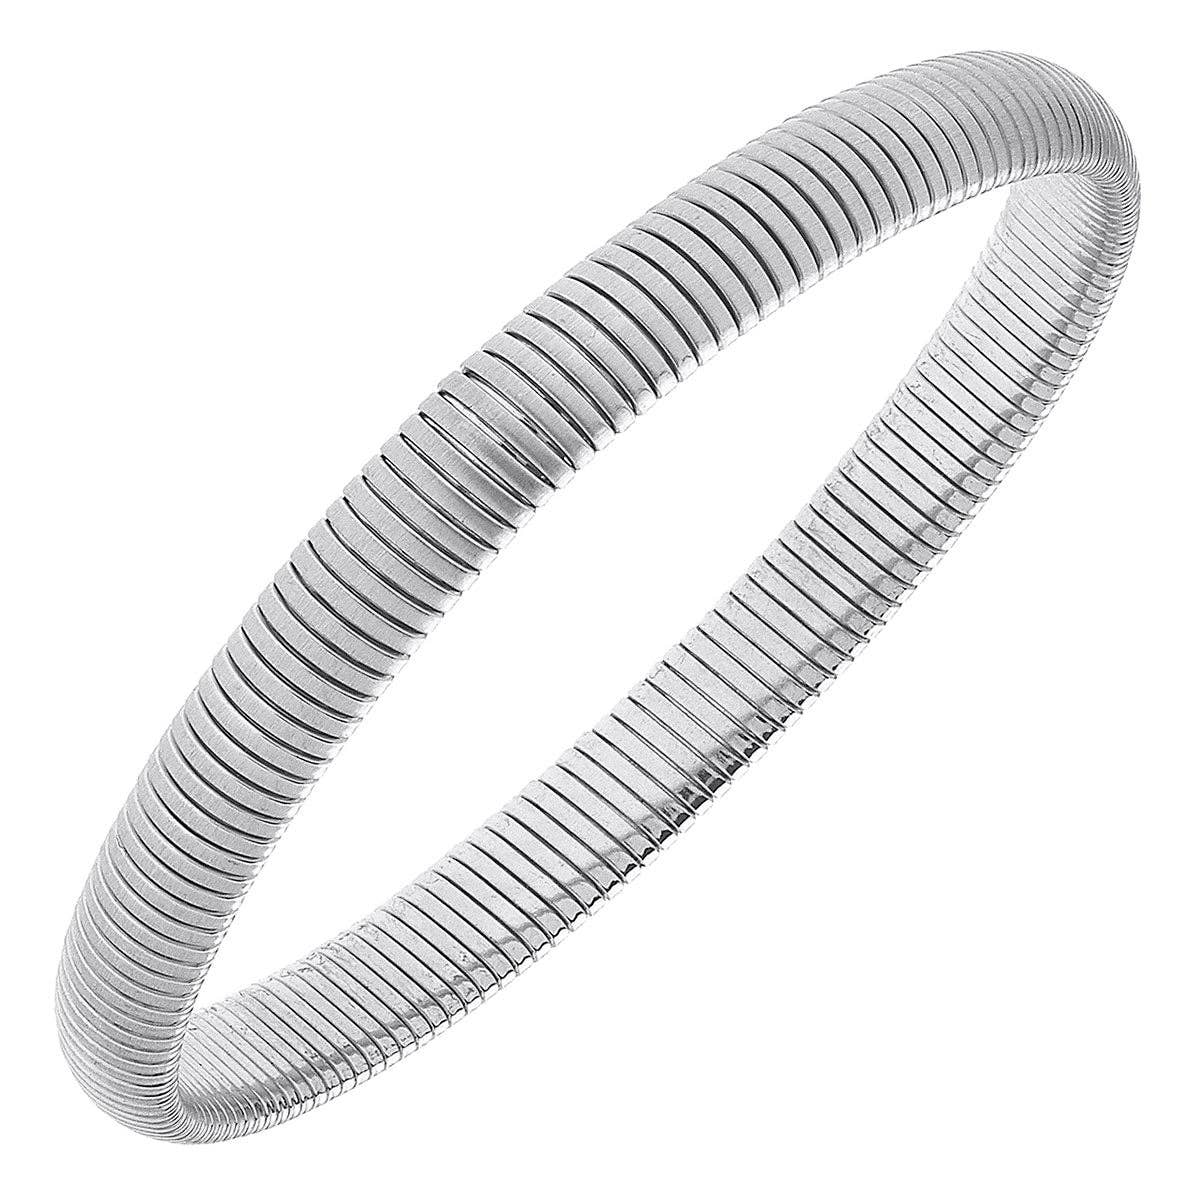 Florence Skinny Watchband Bangle in Satin Silver